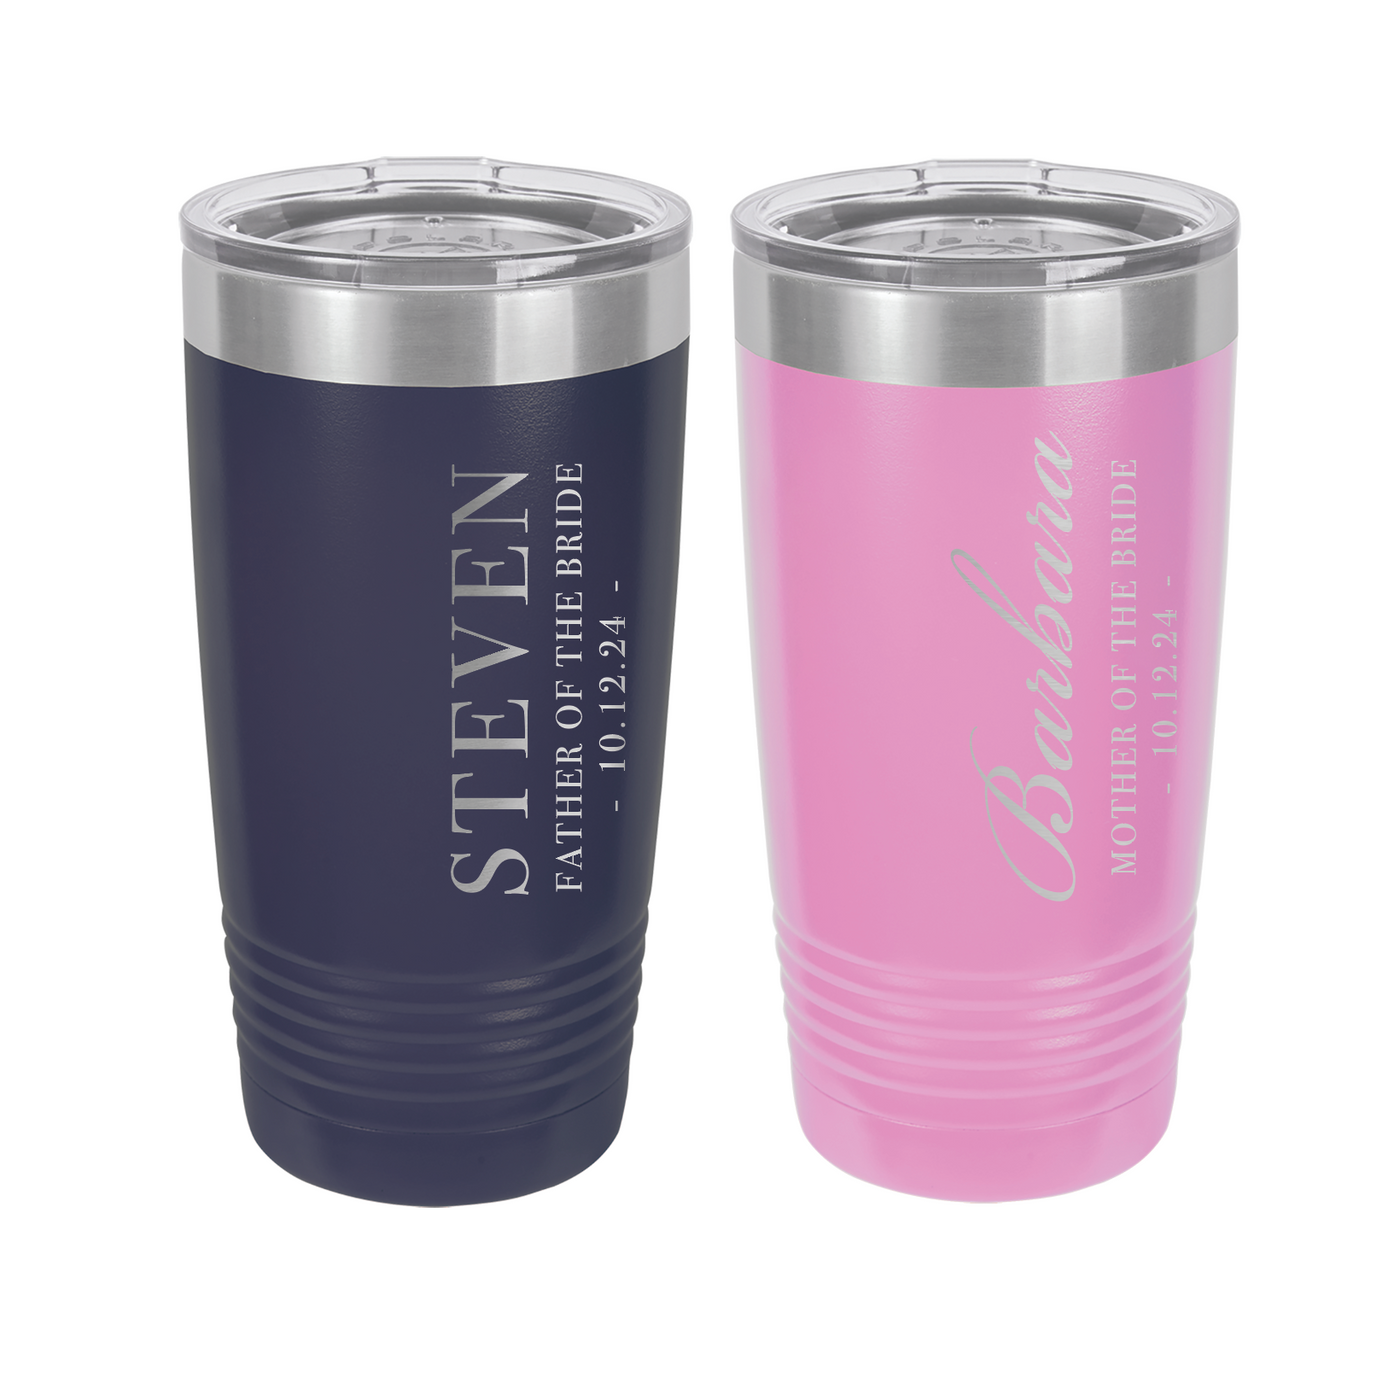 Parents of the Bride or Groom Tumbler